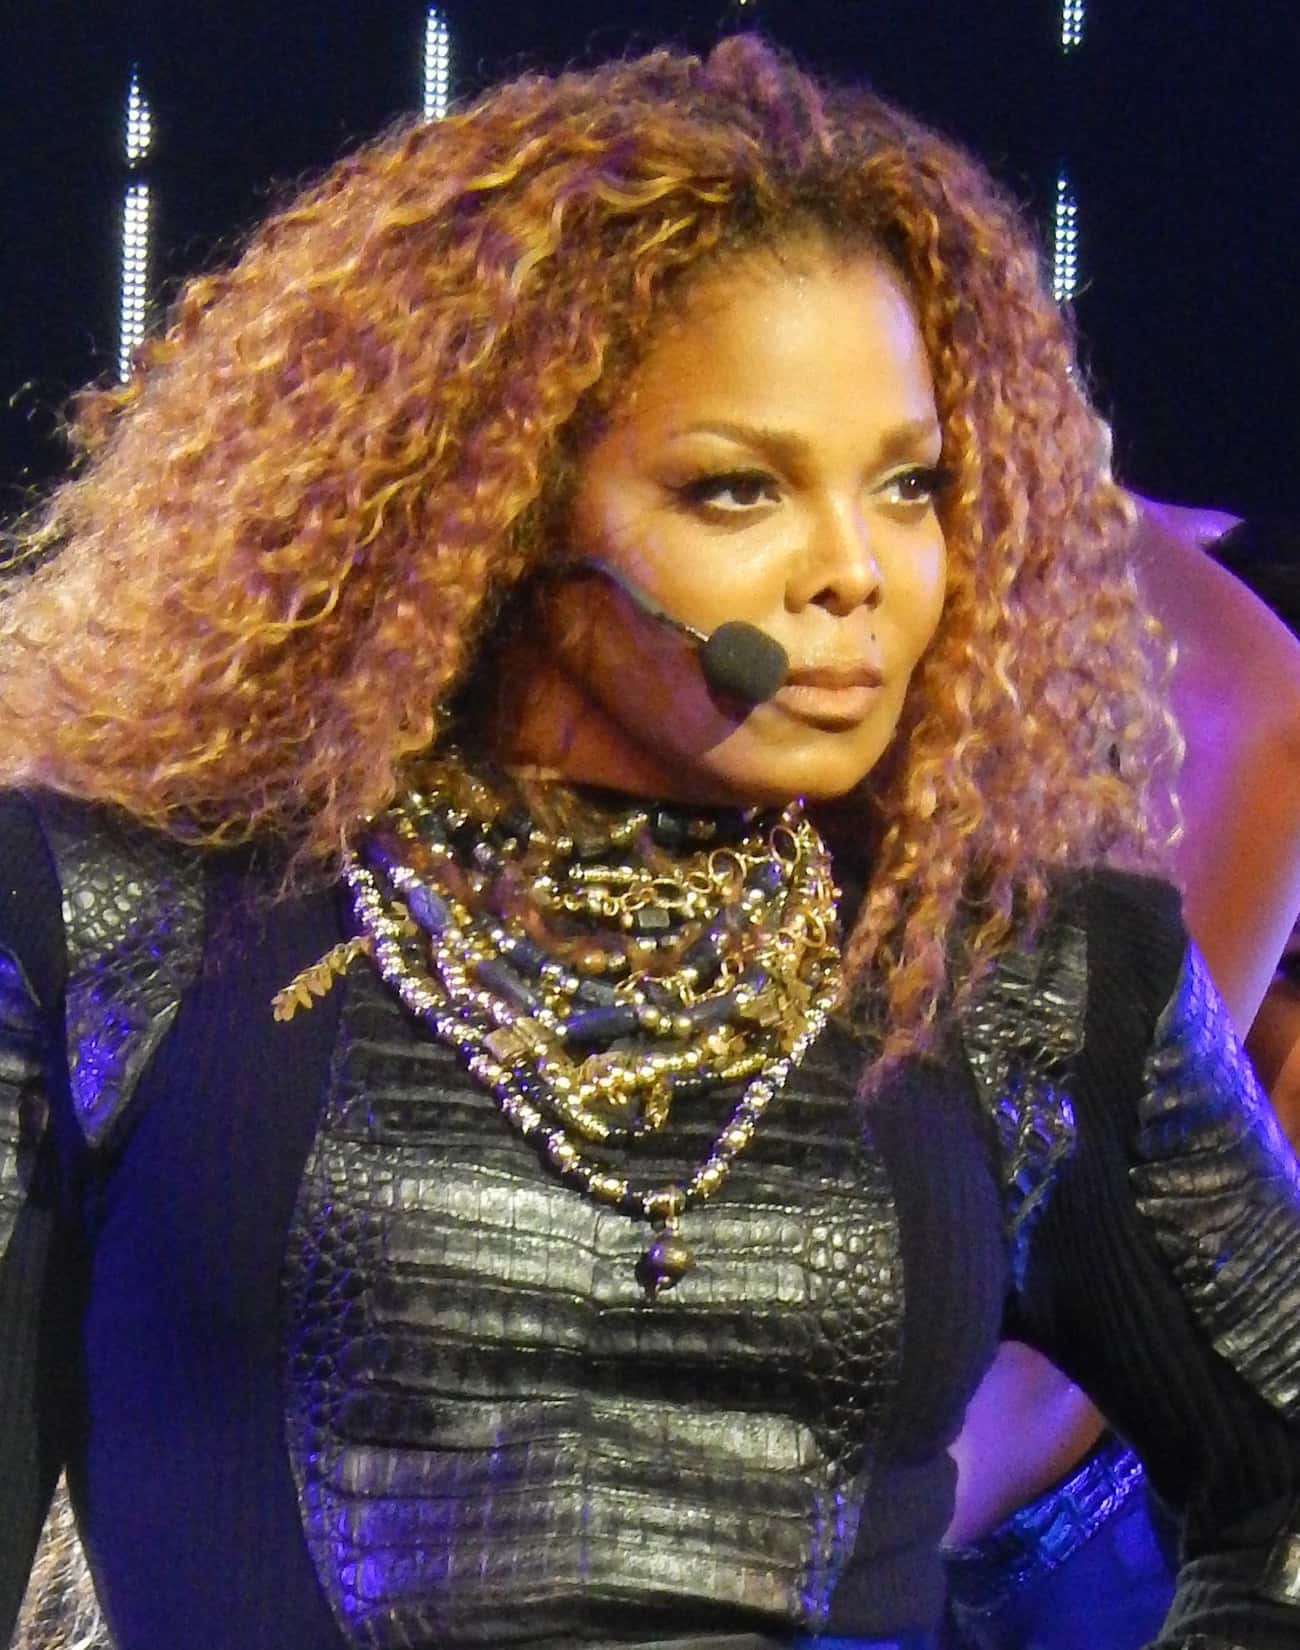 Janet Jackson's Songs Were Blacklisted From The Radio Due To The Infamous 2004 Super Bowl Halftime Show